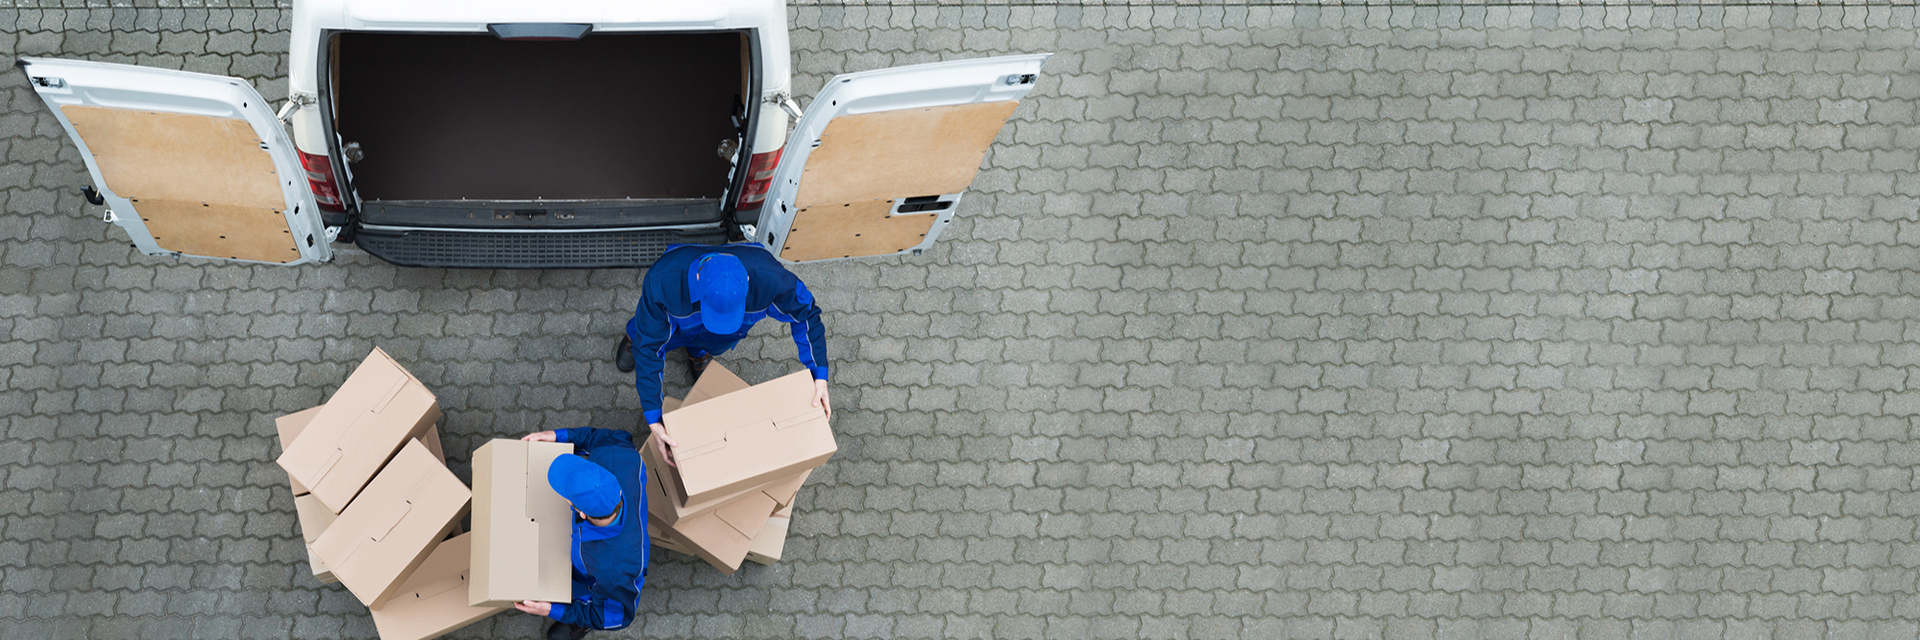 overhead view of two associates unloading boxes from white van